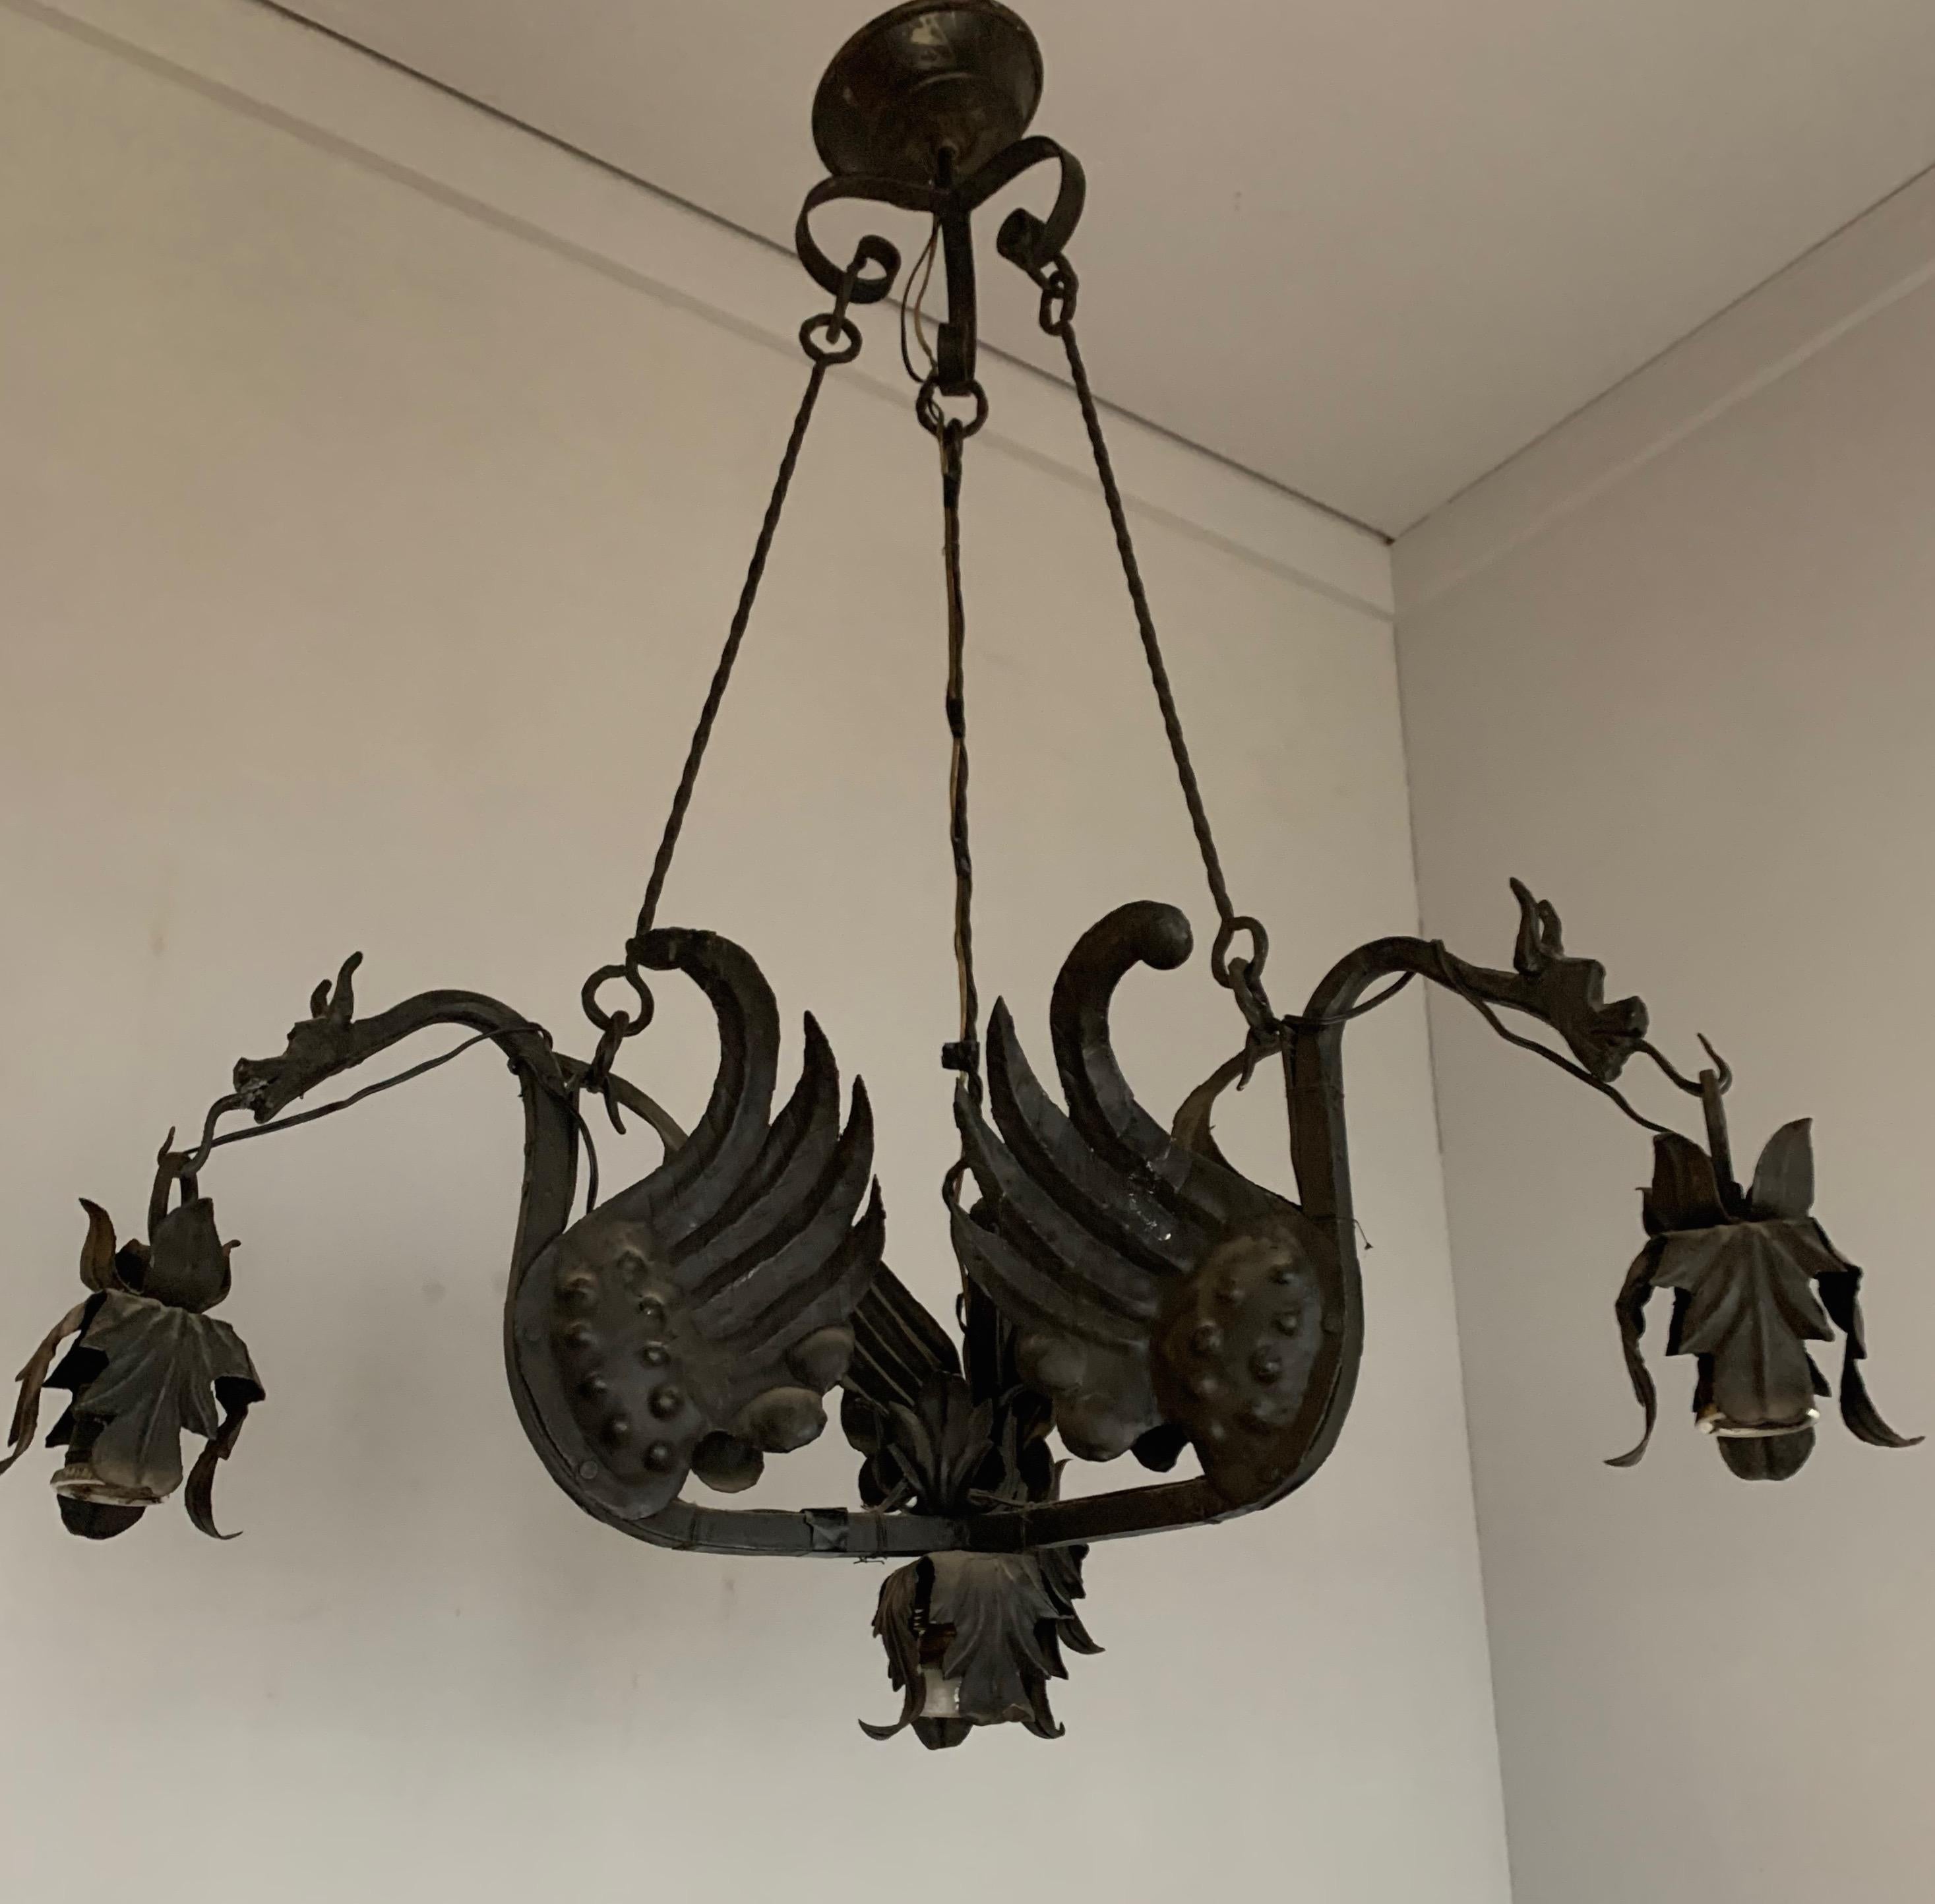 Awesome Italian Pendant / Metal Art Light Fixture with Flying Dragon Sculptures 11